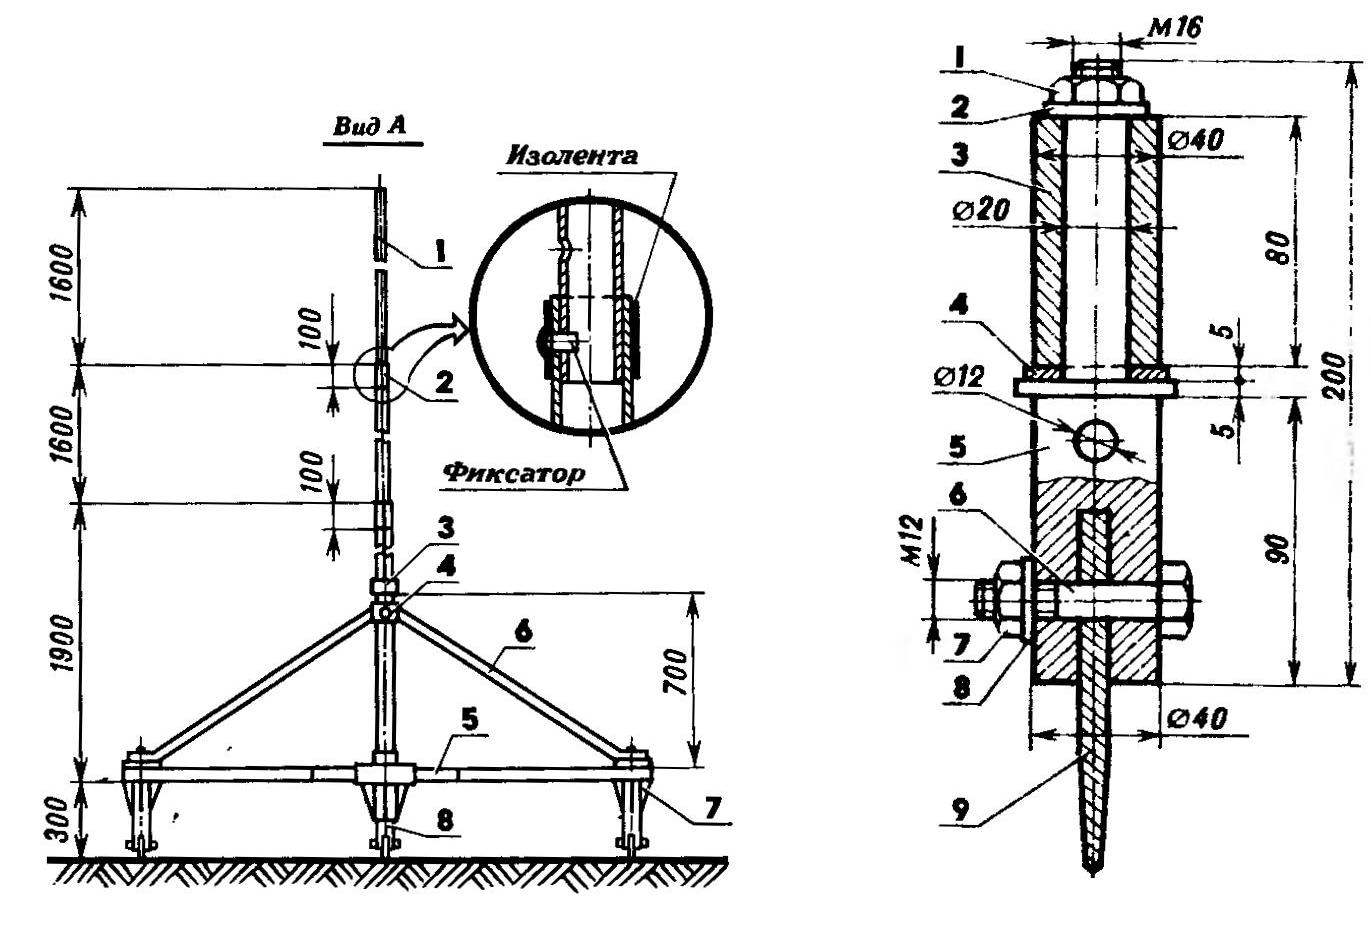 Fig. 2. The steering unit glider